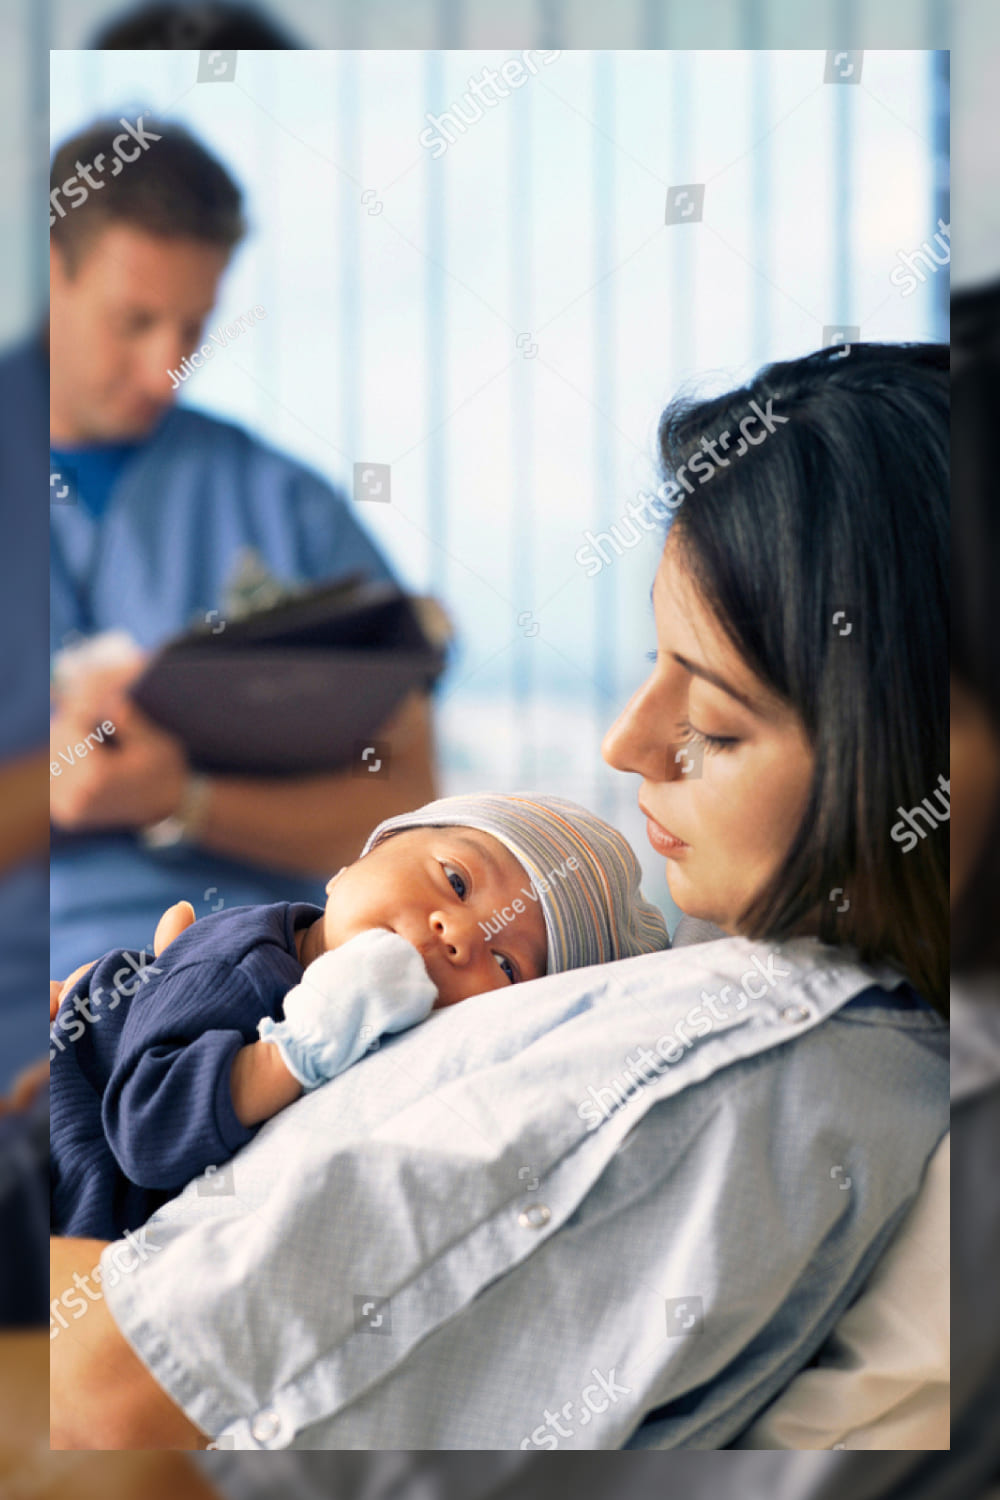 A side view of a mother holding a baby in the hospital bed while a doctor is sitting in the background checking reports.